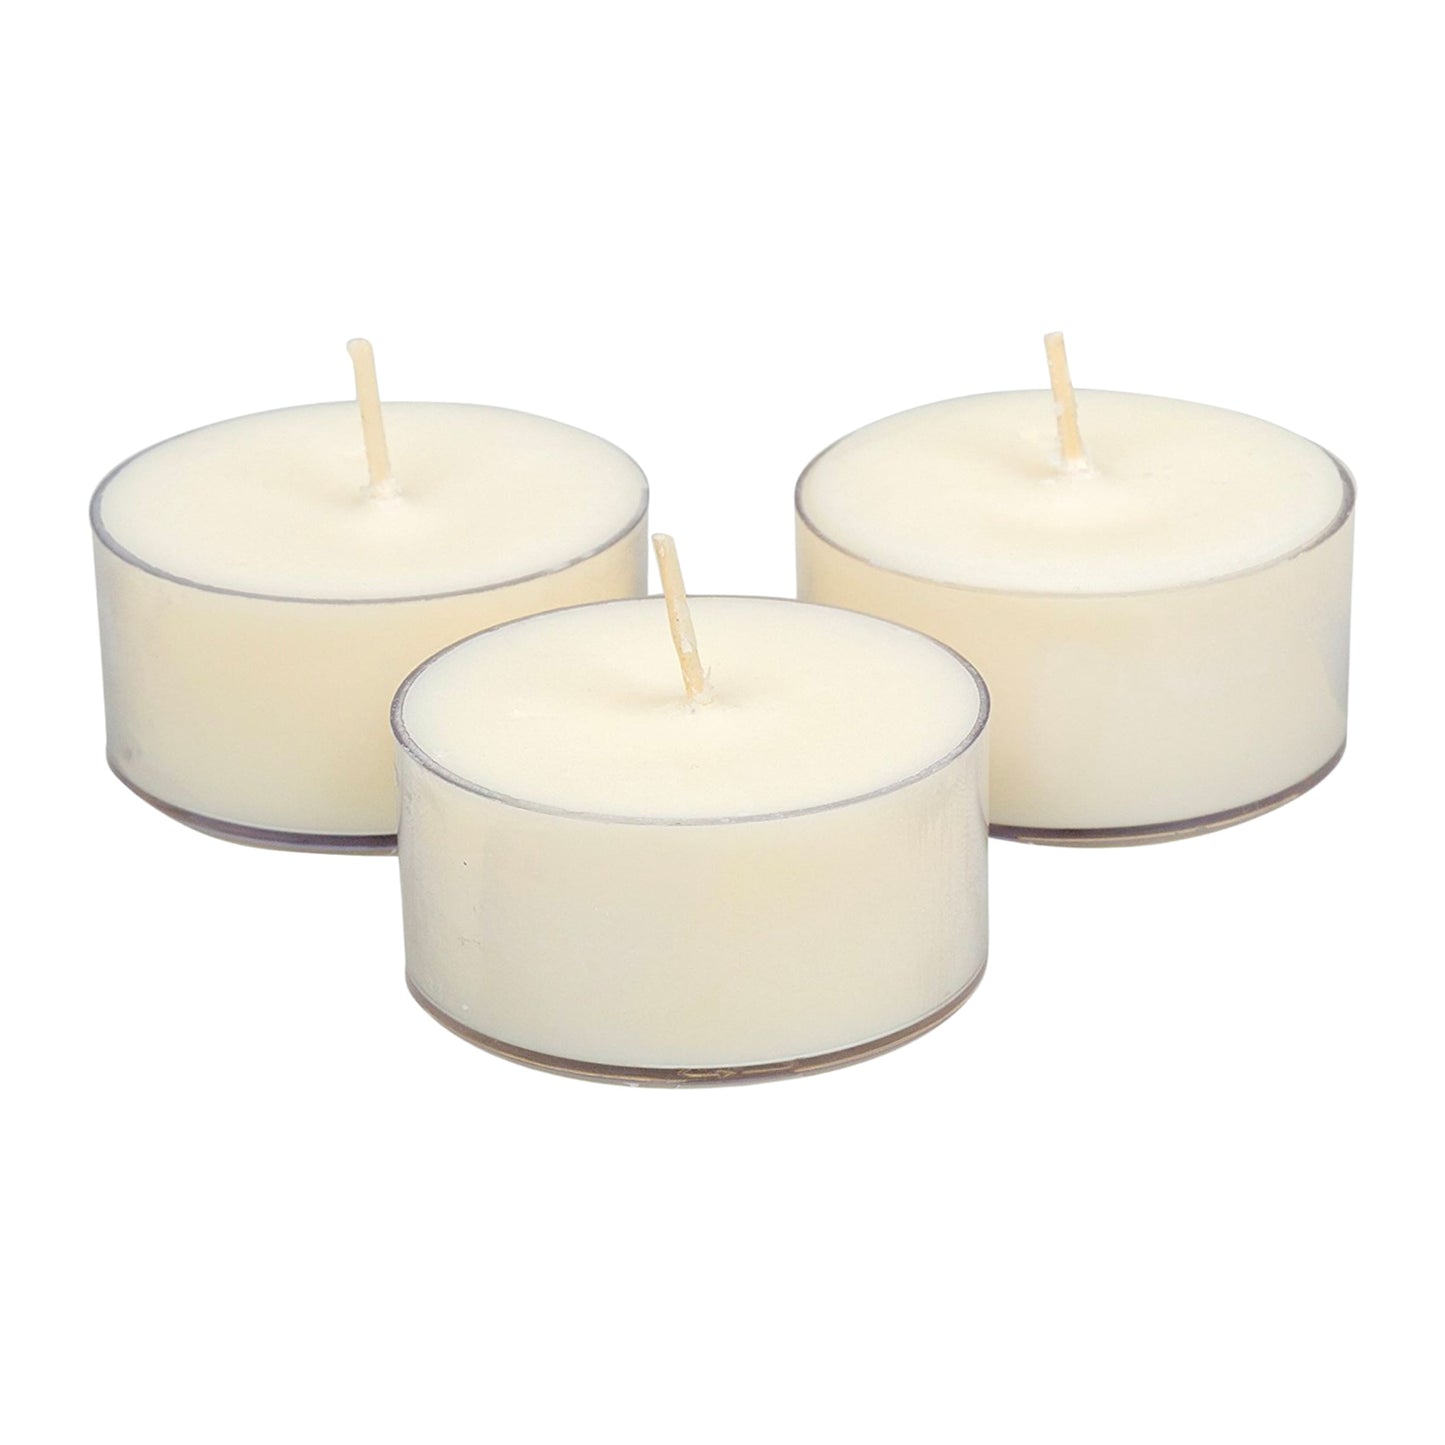 3 Shō-moon Natural Energise scented Tealights Candle with pure essential oils and clean burning natural wax.